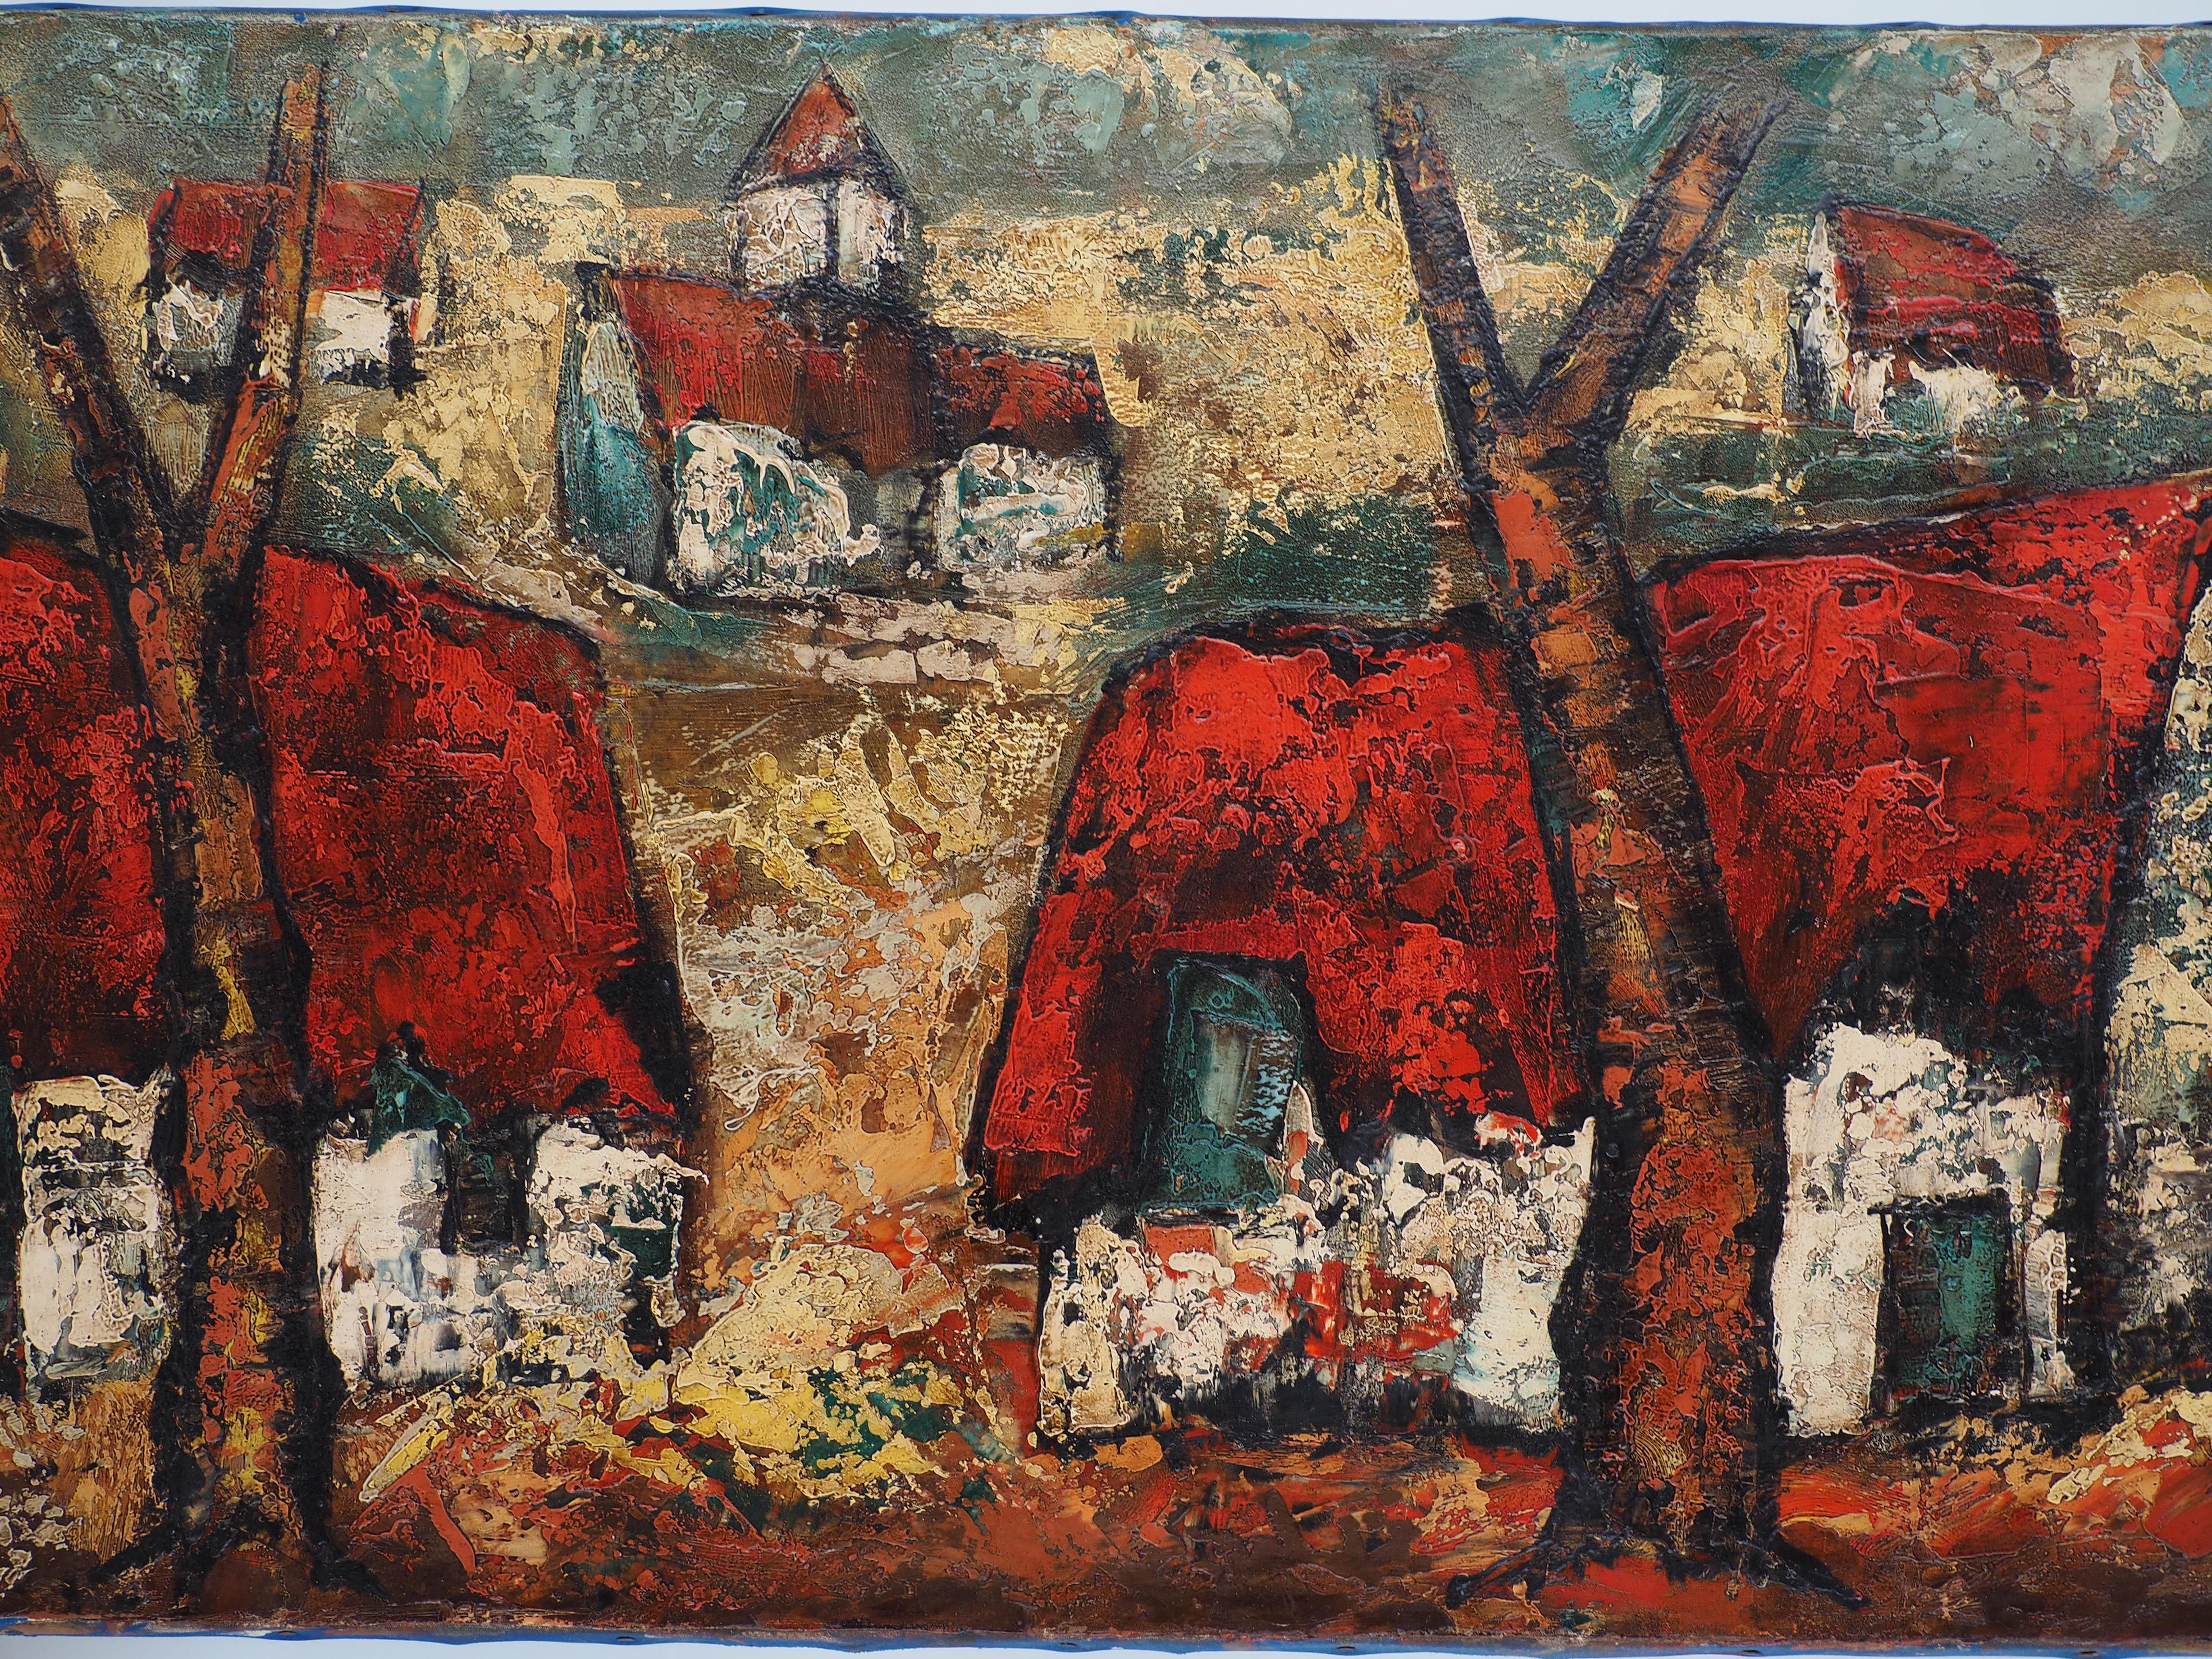 Henri d'Anty
Brittany : Small Traditional Village

Original oil on canvas
Handsigned bottom left
On canvas 55 x 100 cm (c. 22 x 40  inch)

Excellent condition